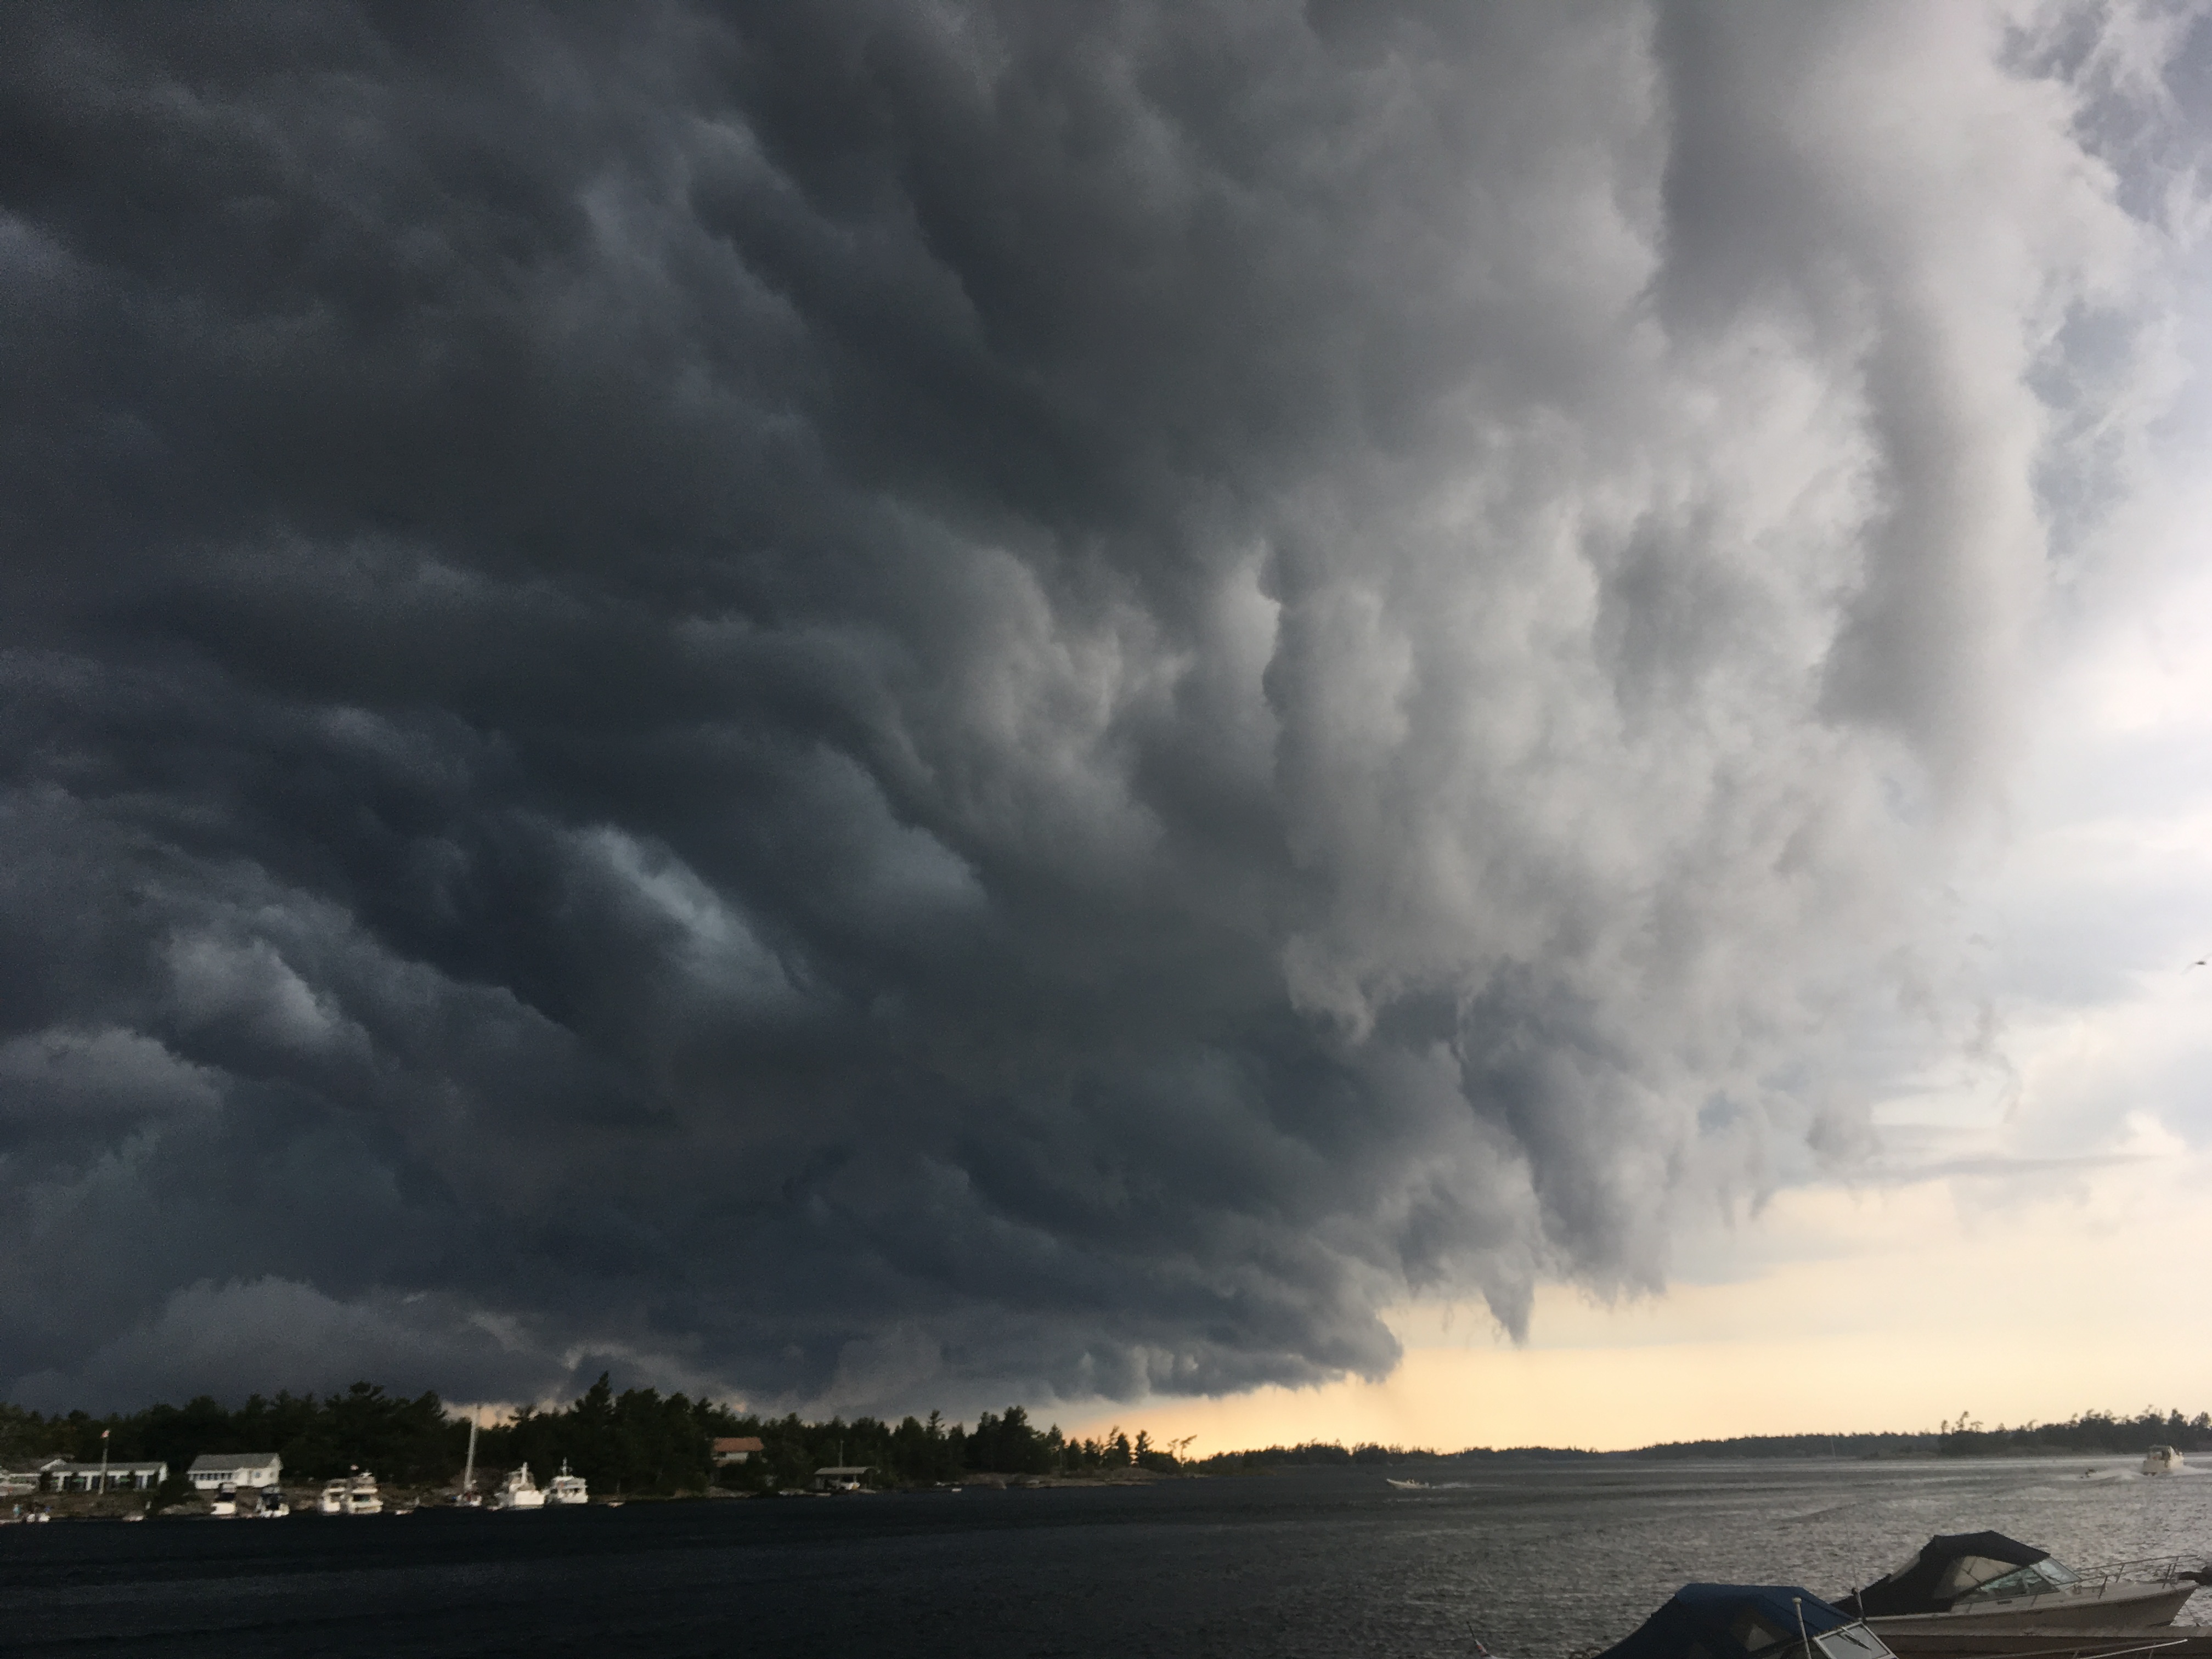 More flooding and extreme weather events expected in the Great Lakes